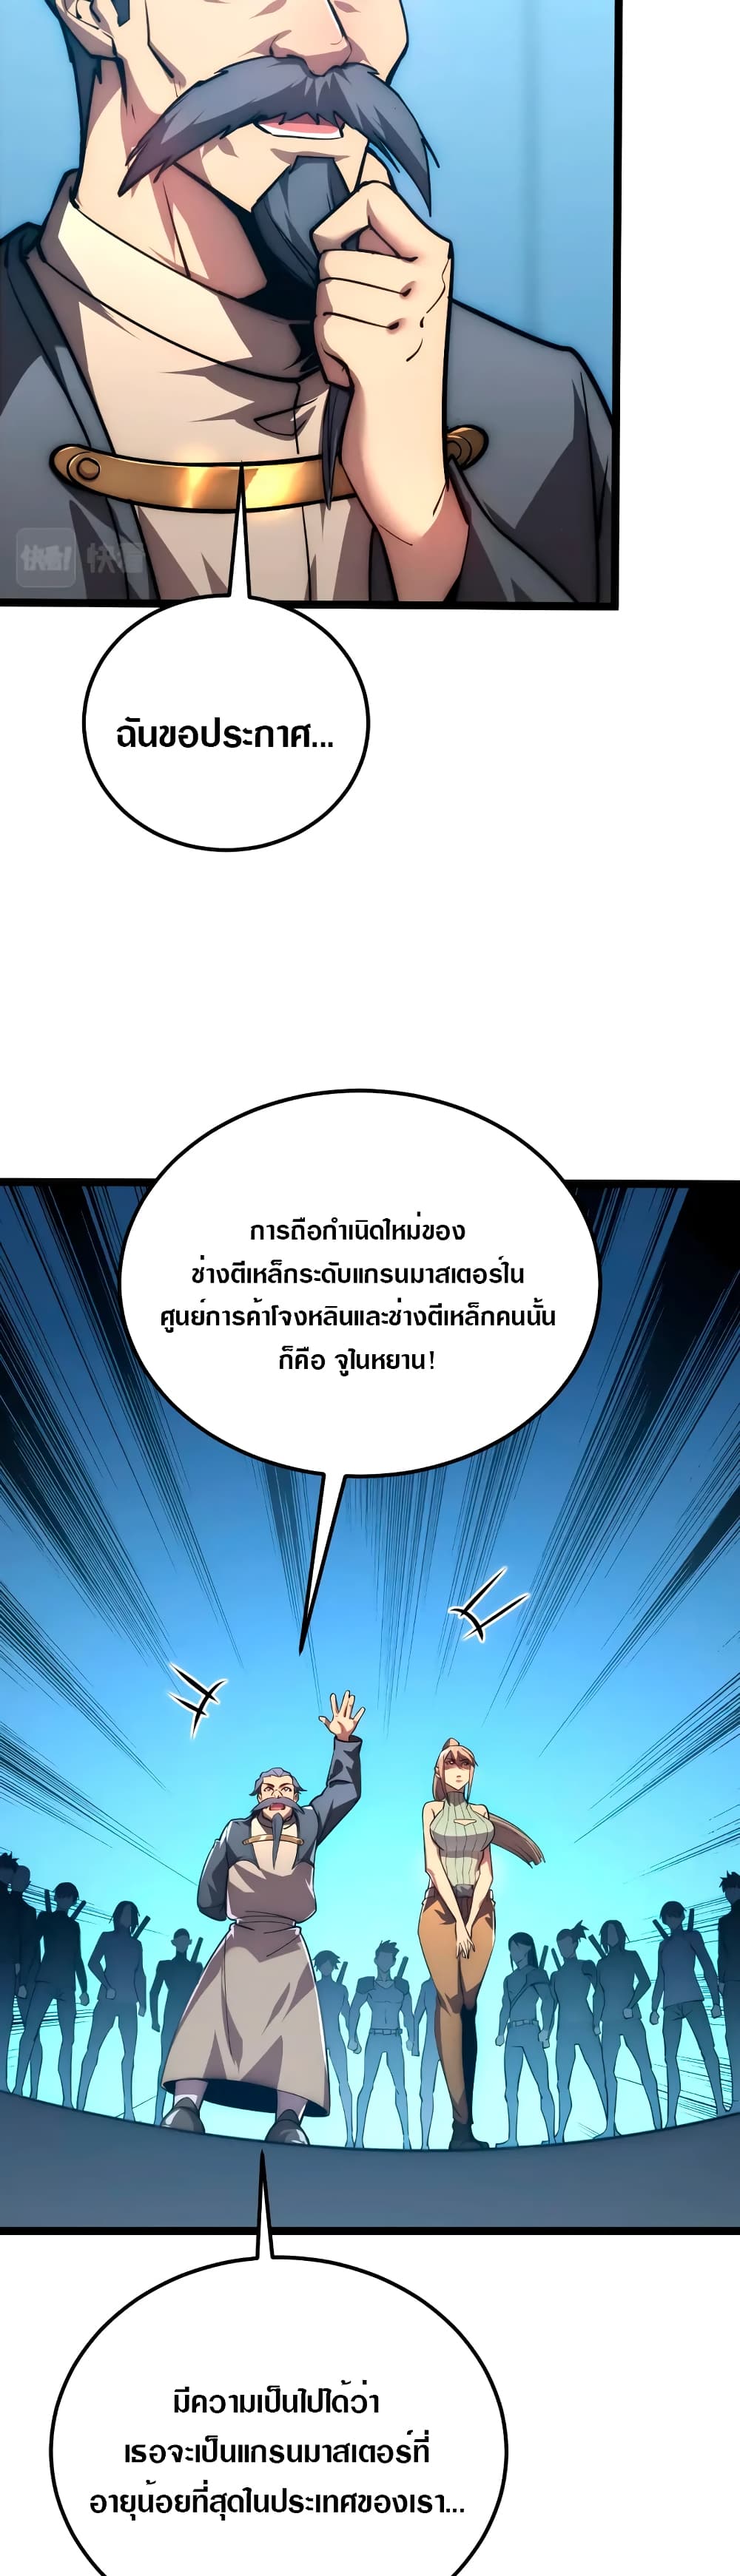 Rise From The Rubble เศษซากวันสิ้นโลก 123-123